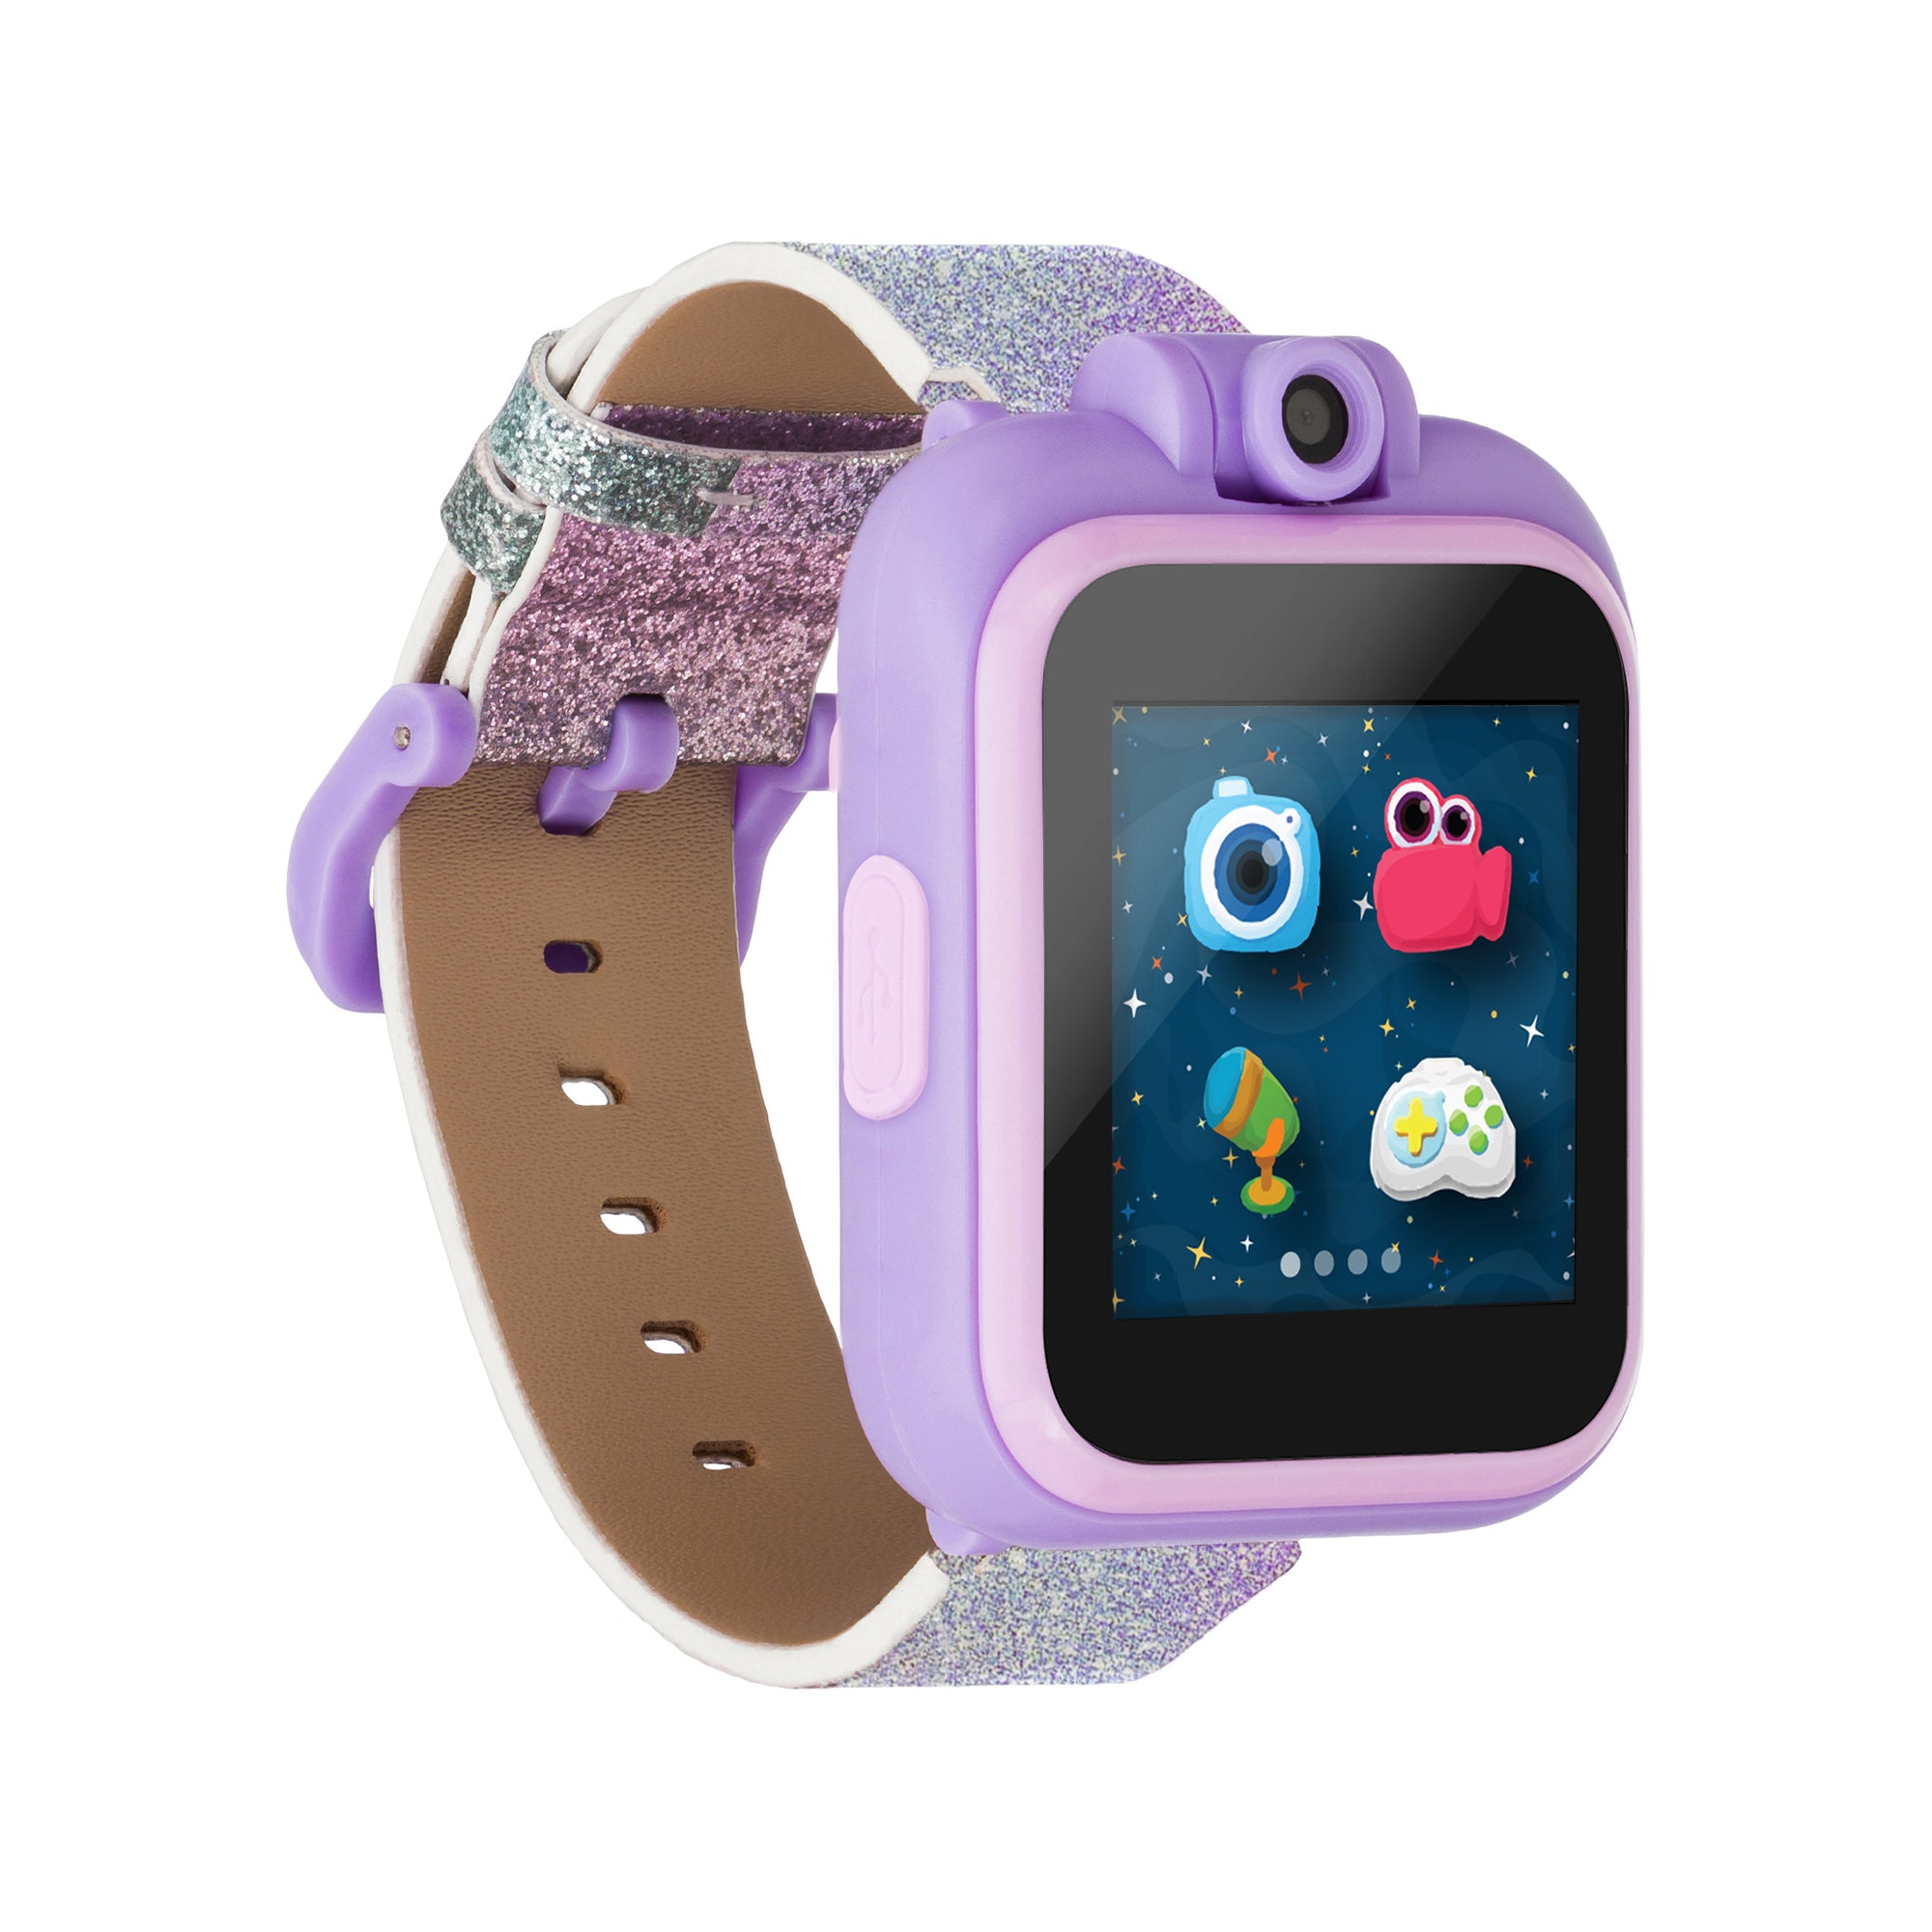 PlayZoom Smartwatch for Kids: Purple Glitter affordable smart watch